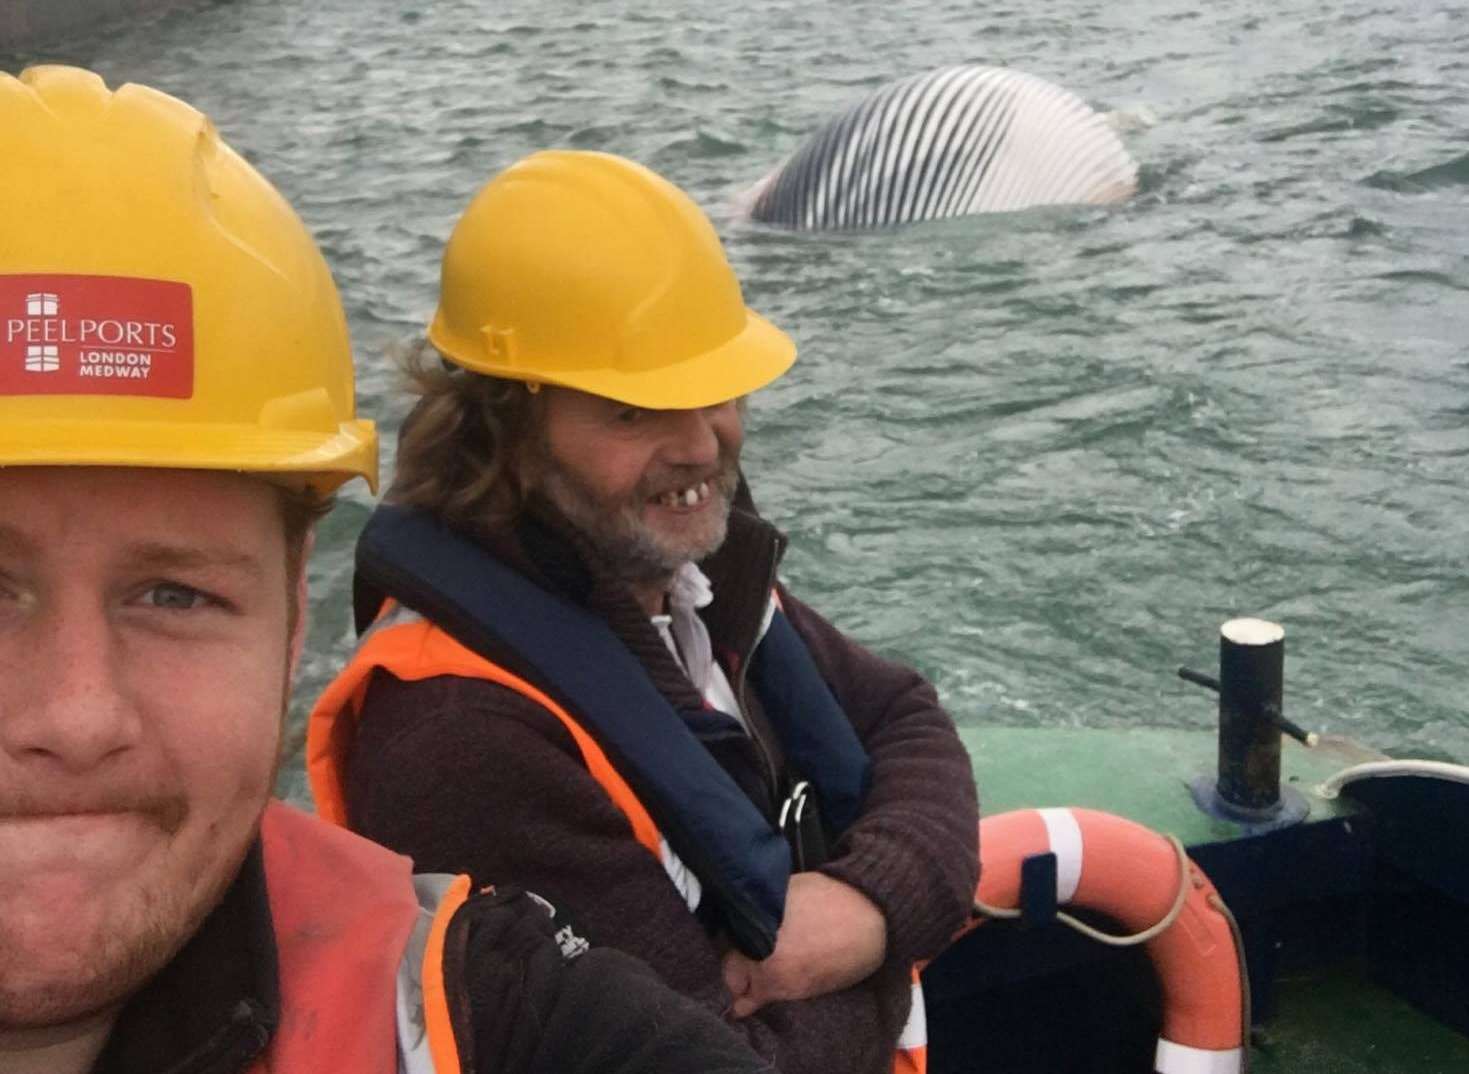 Jack Smedley and Peter Sands towing the body of the whale